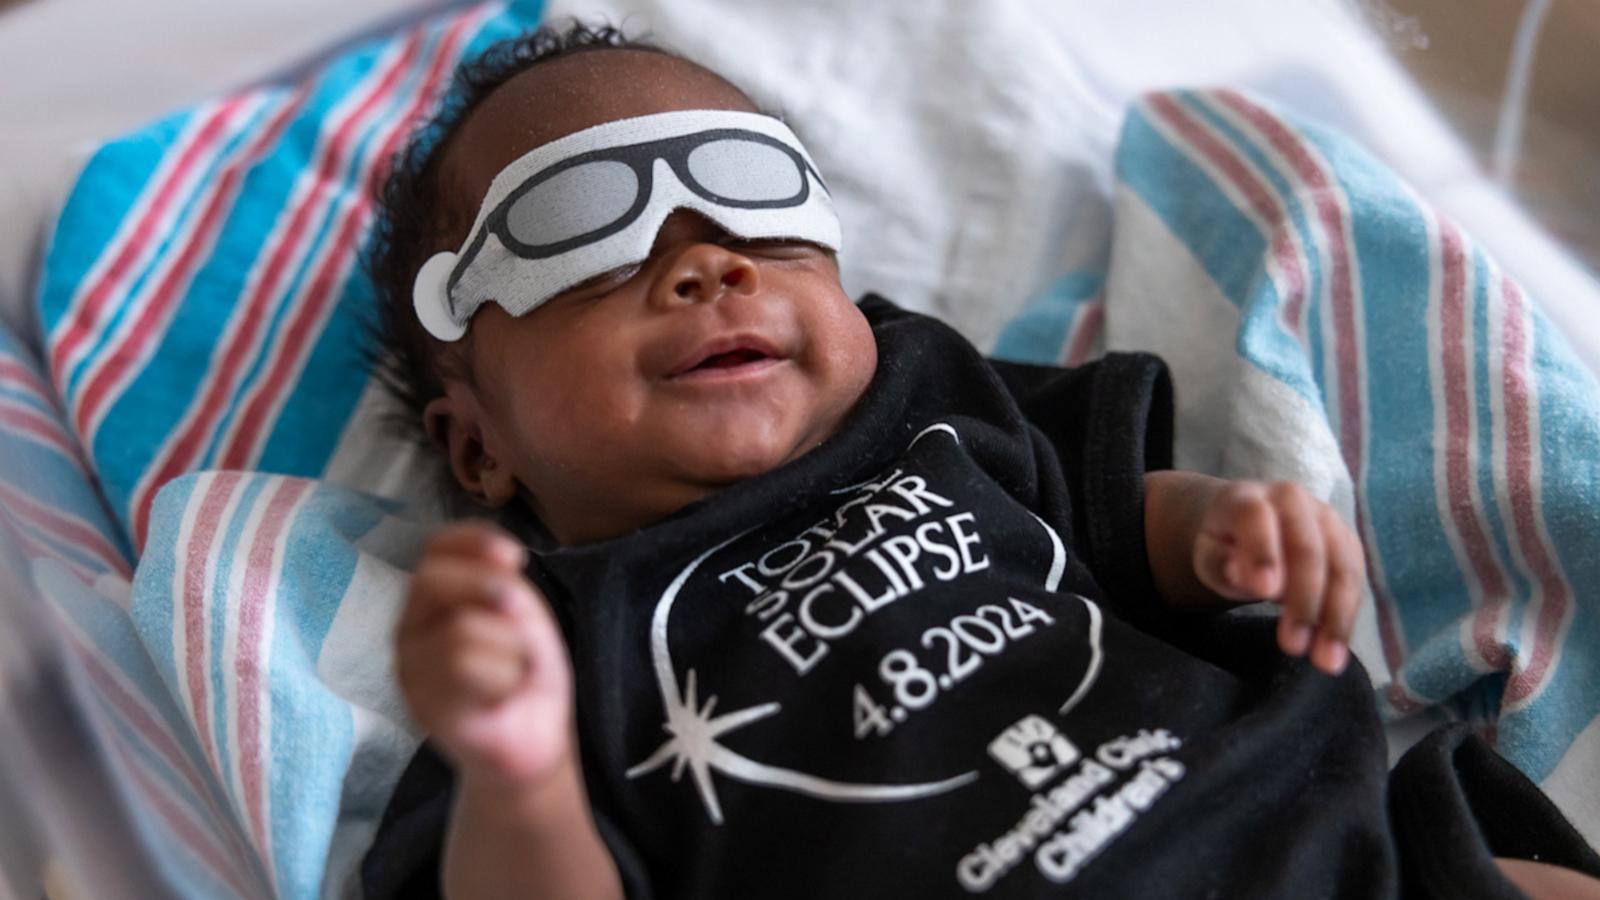 VIDEO: These NICU babies are ready for the solar eclipse